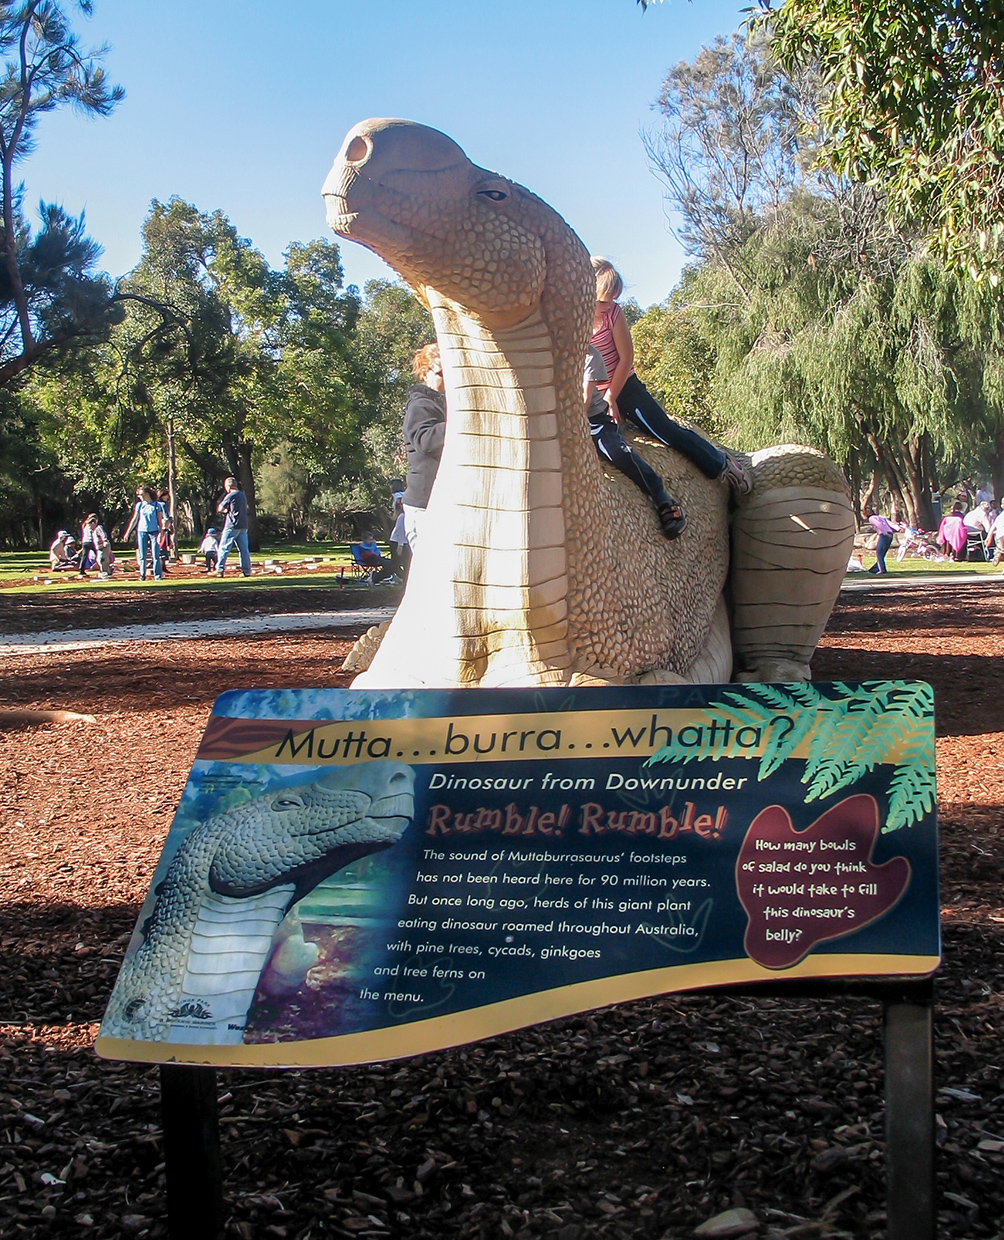 Interpretive sign at the Synergy Parkland, King's Park, Perth